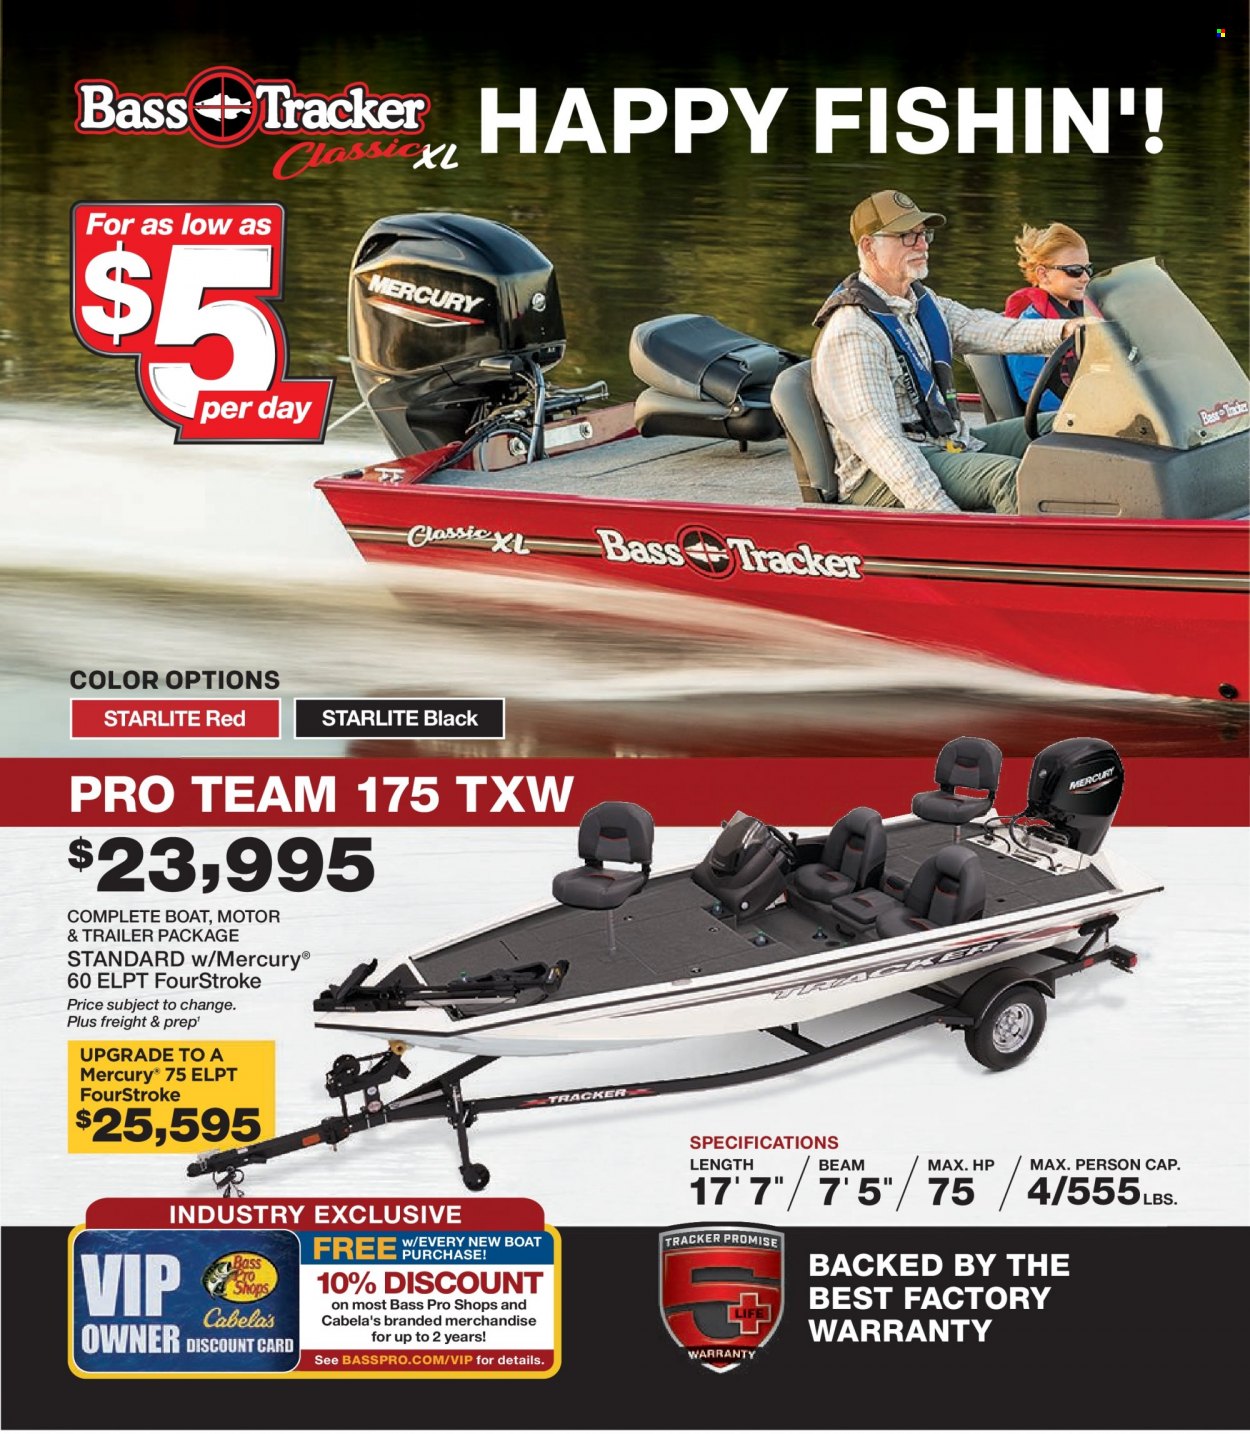 Bass Pro Shops flyer . Page 70.